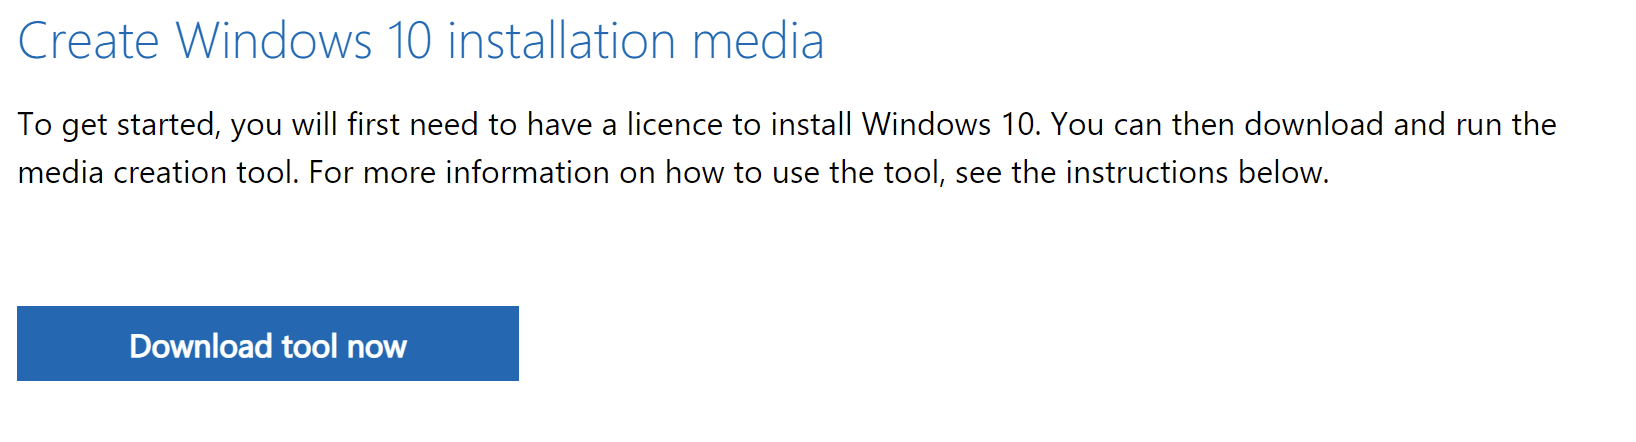 A screenshot of the windows 10 download tool. It has a large blue button that reads: Download tool now.